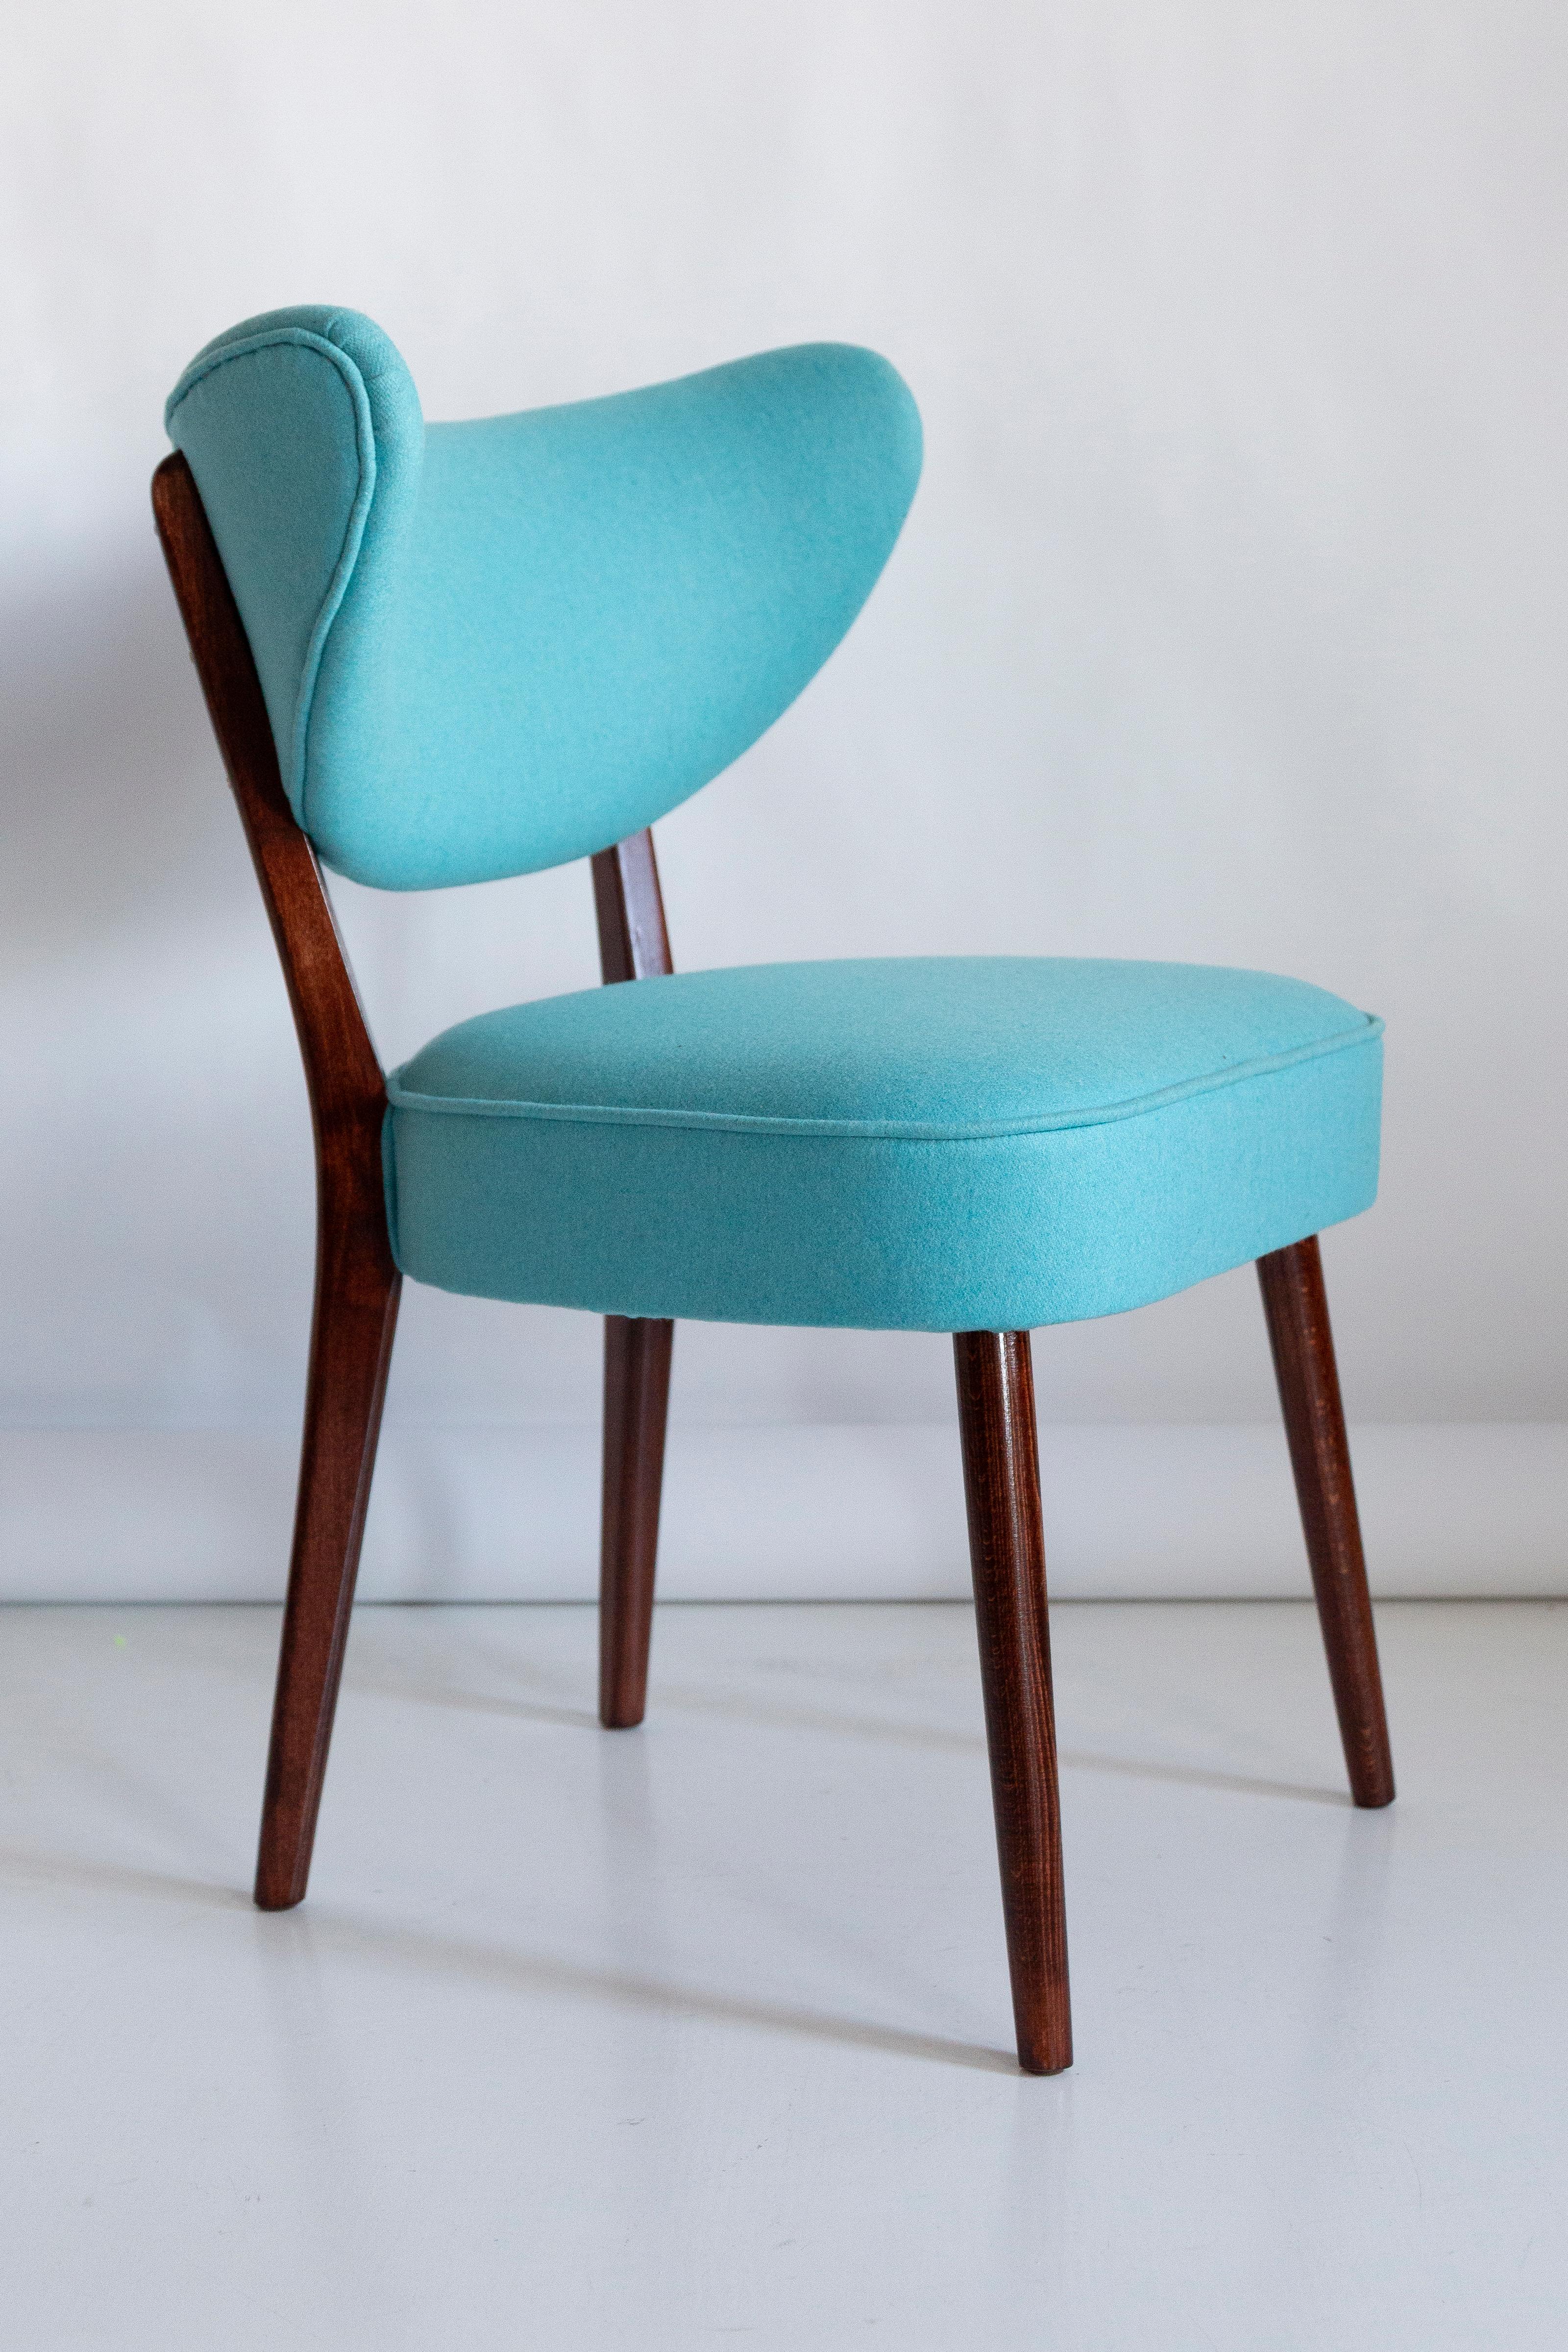 Polish Set of Ten Shell Dining Chairs, Turquoise Wool, by Vintola Studio, Europe. For Sale